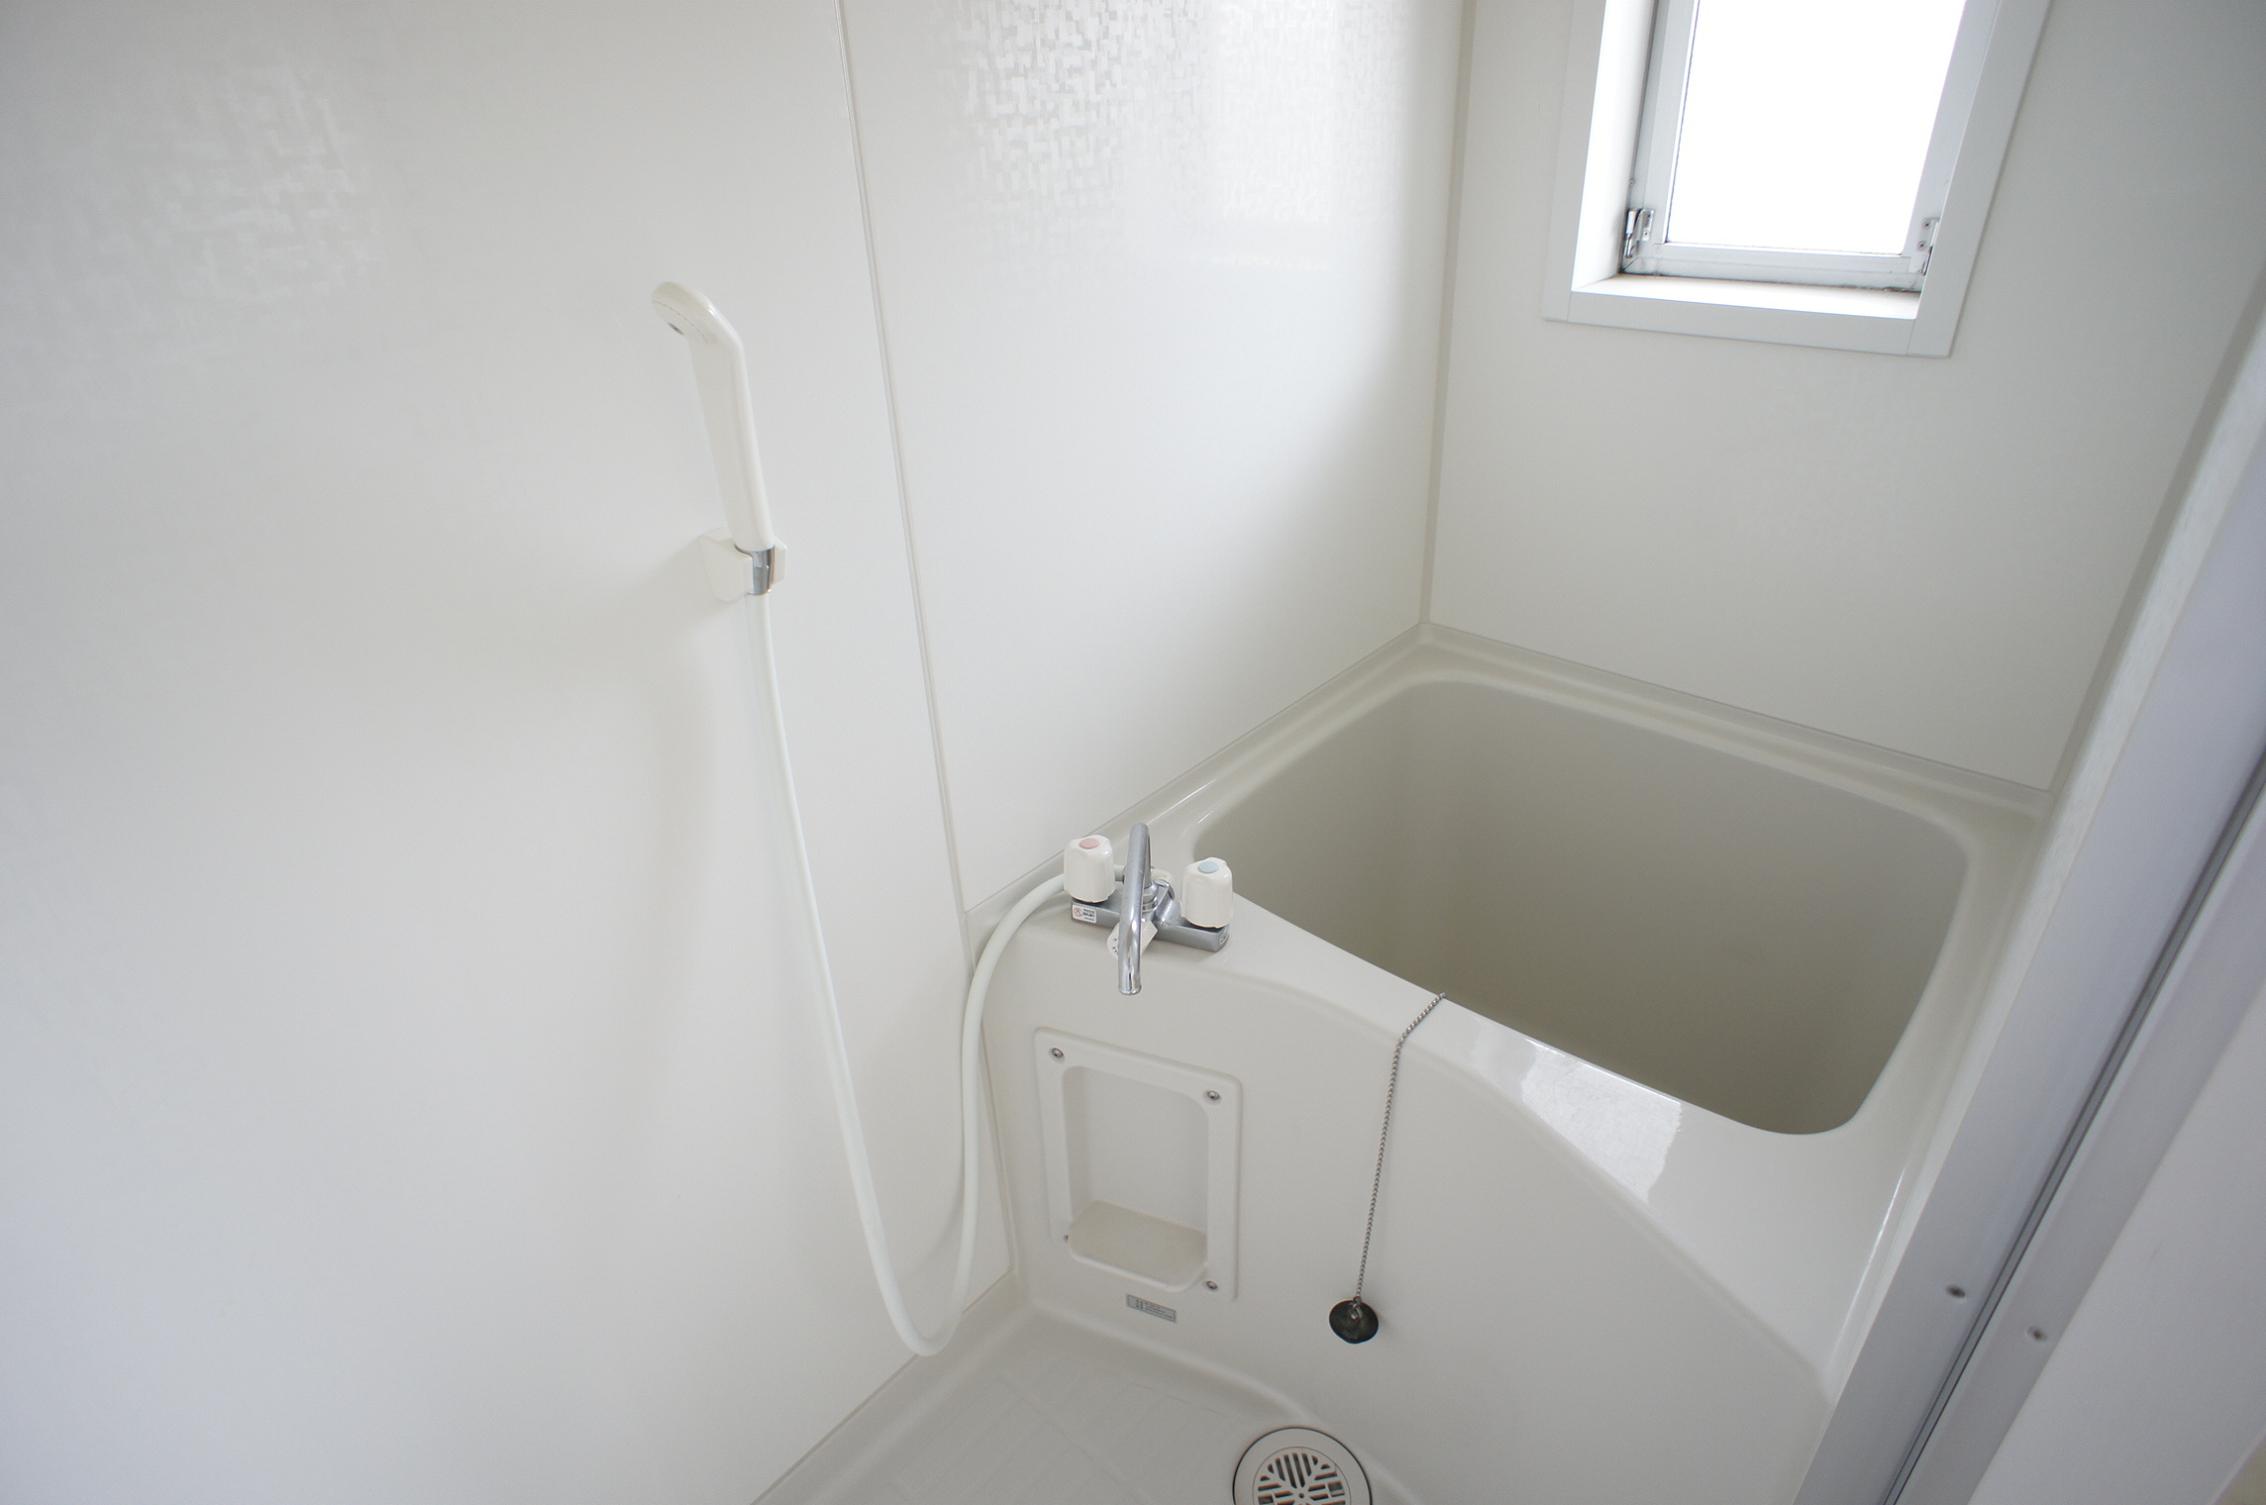 Bath. Bathing is a little small but fully equipped shower! There is also a window